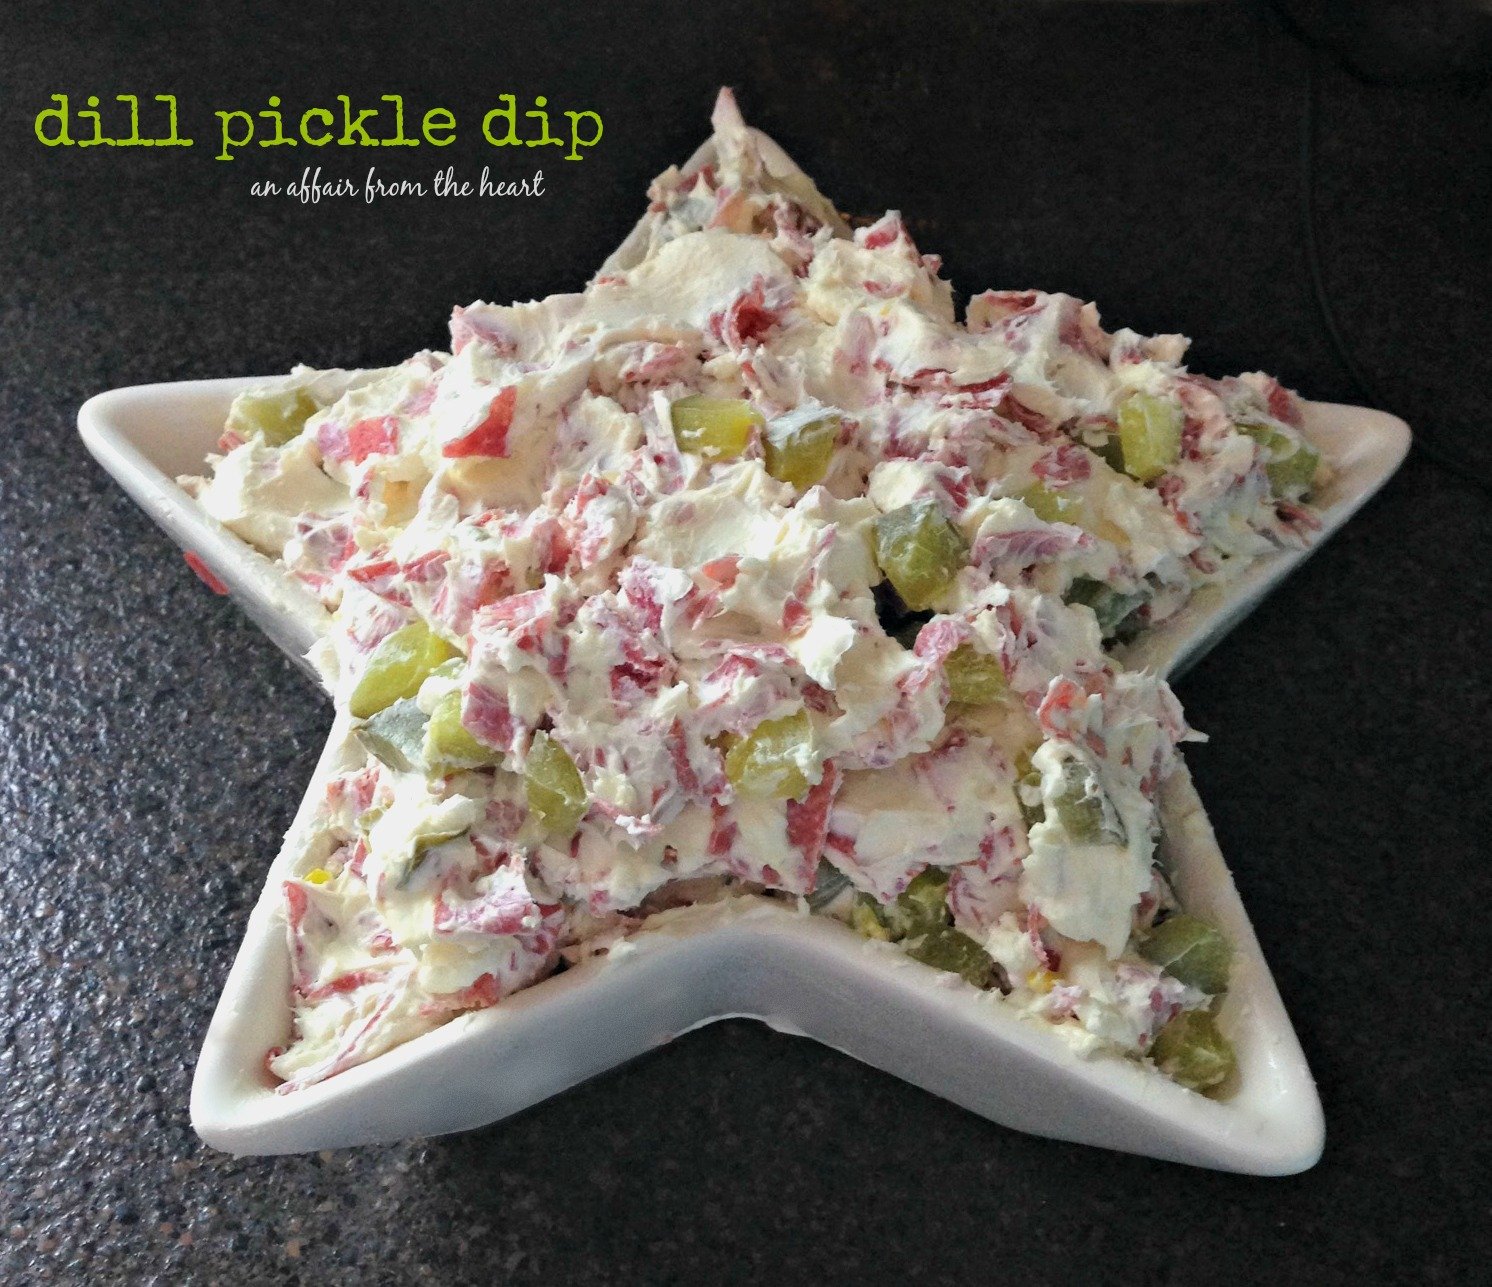 Dill Pickle Dip - Just like those pickle wraps, in an easy dip